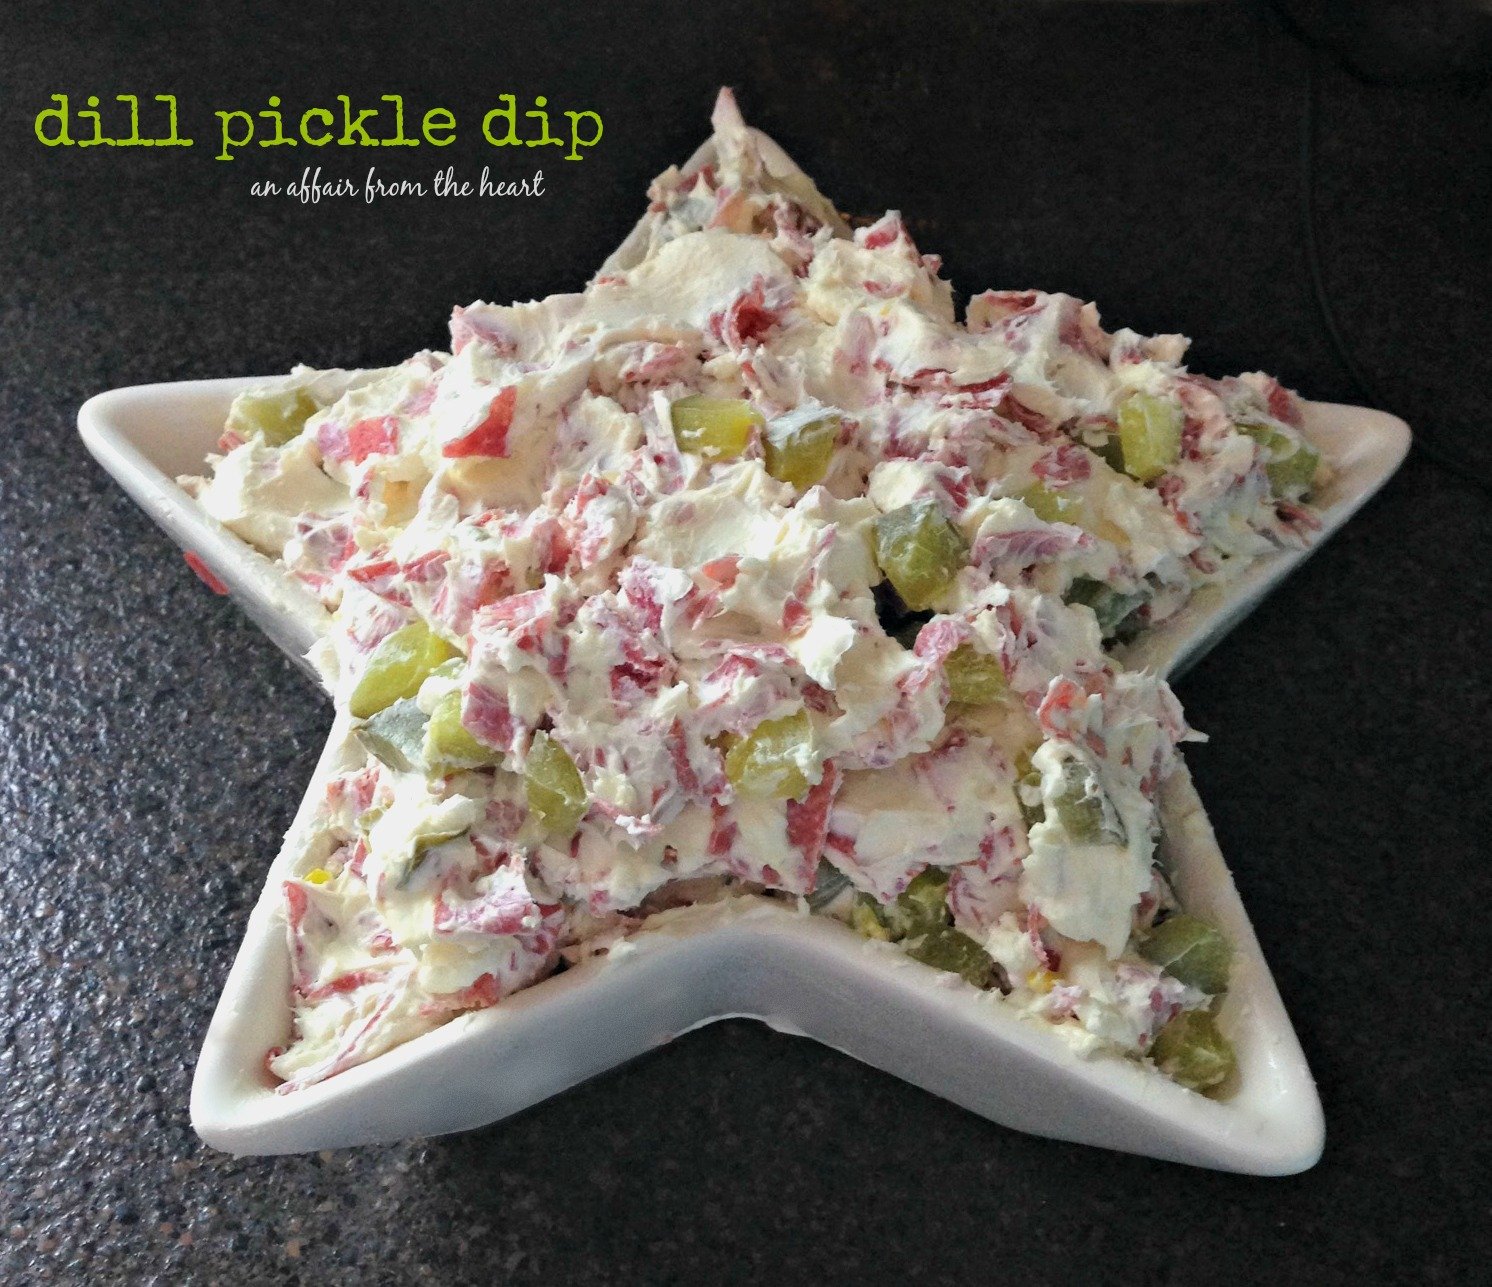 Dill Pickle Dip - Just like those pickle wraps, in an easy dip